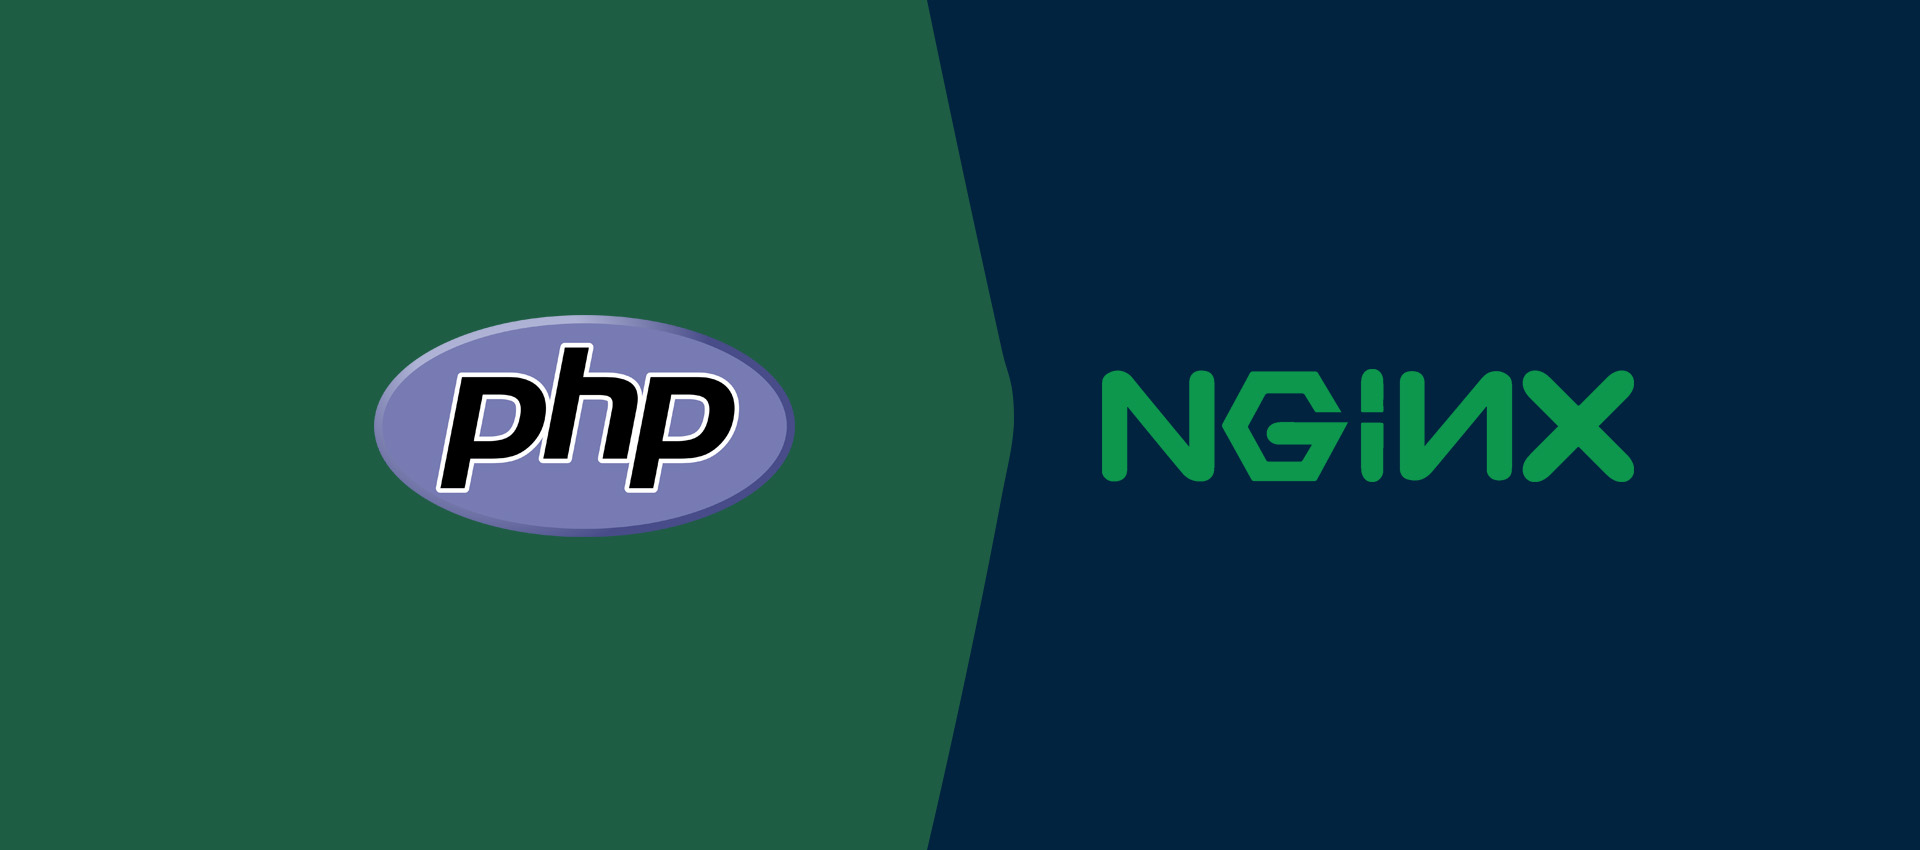 How To Install PHP For Nginx On Ubuntu 20.04 LTS